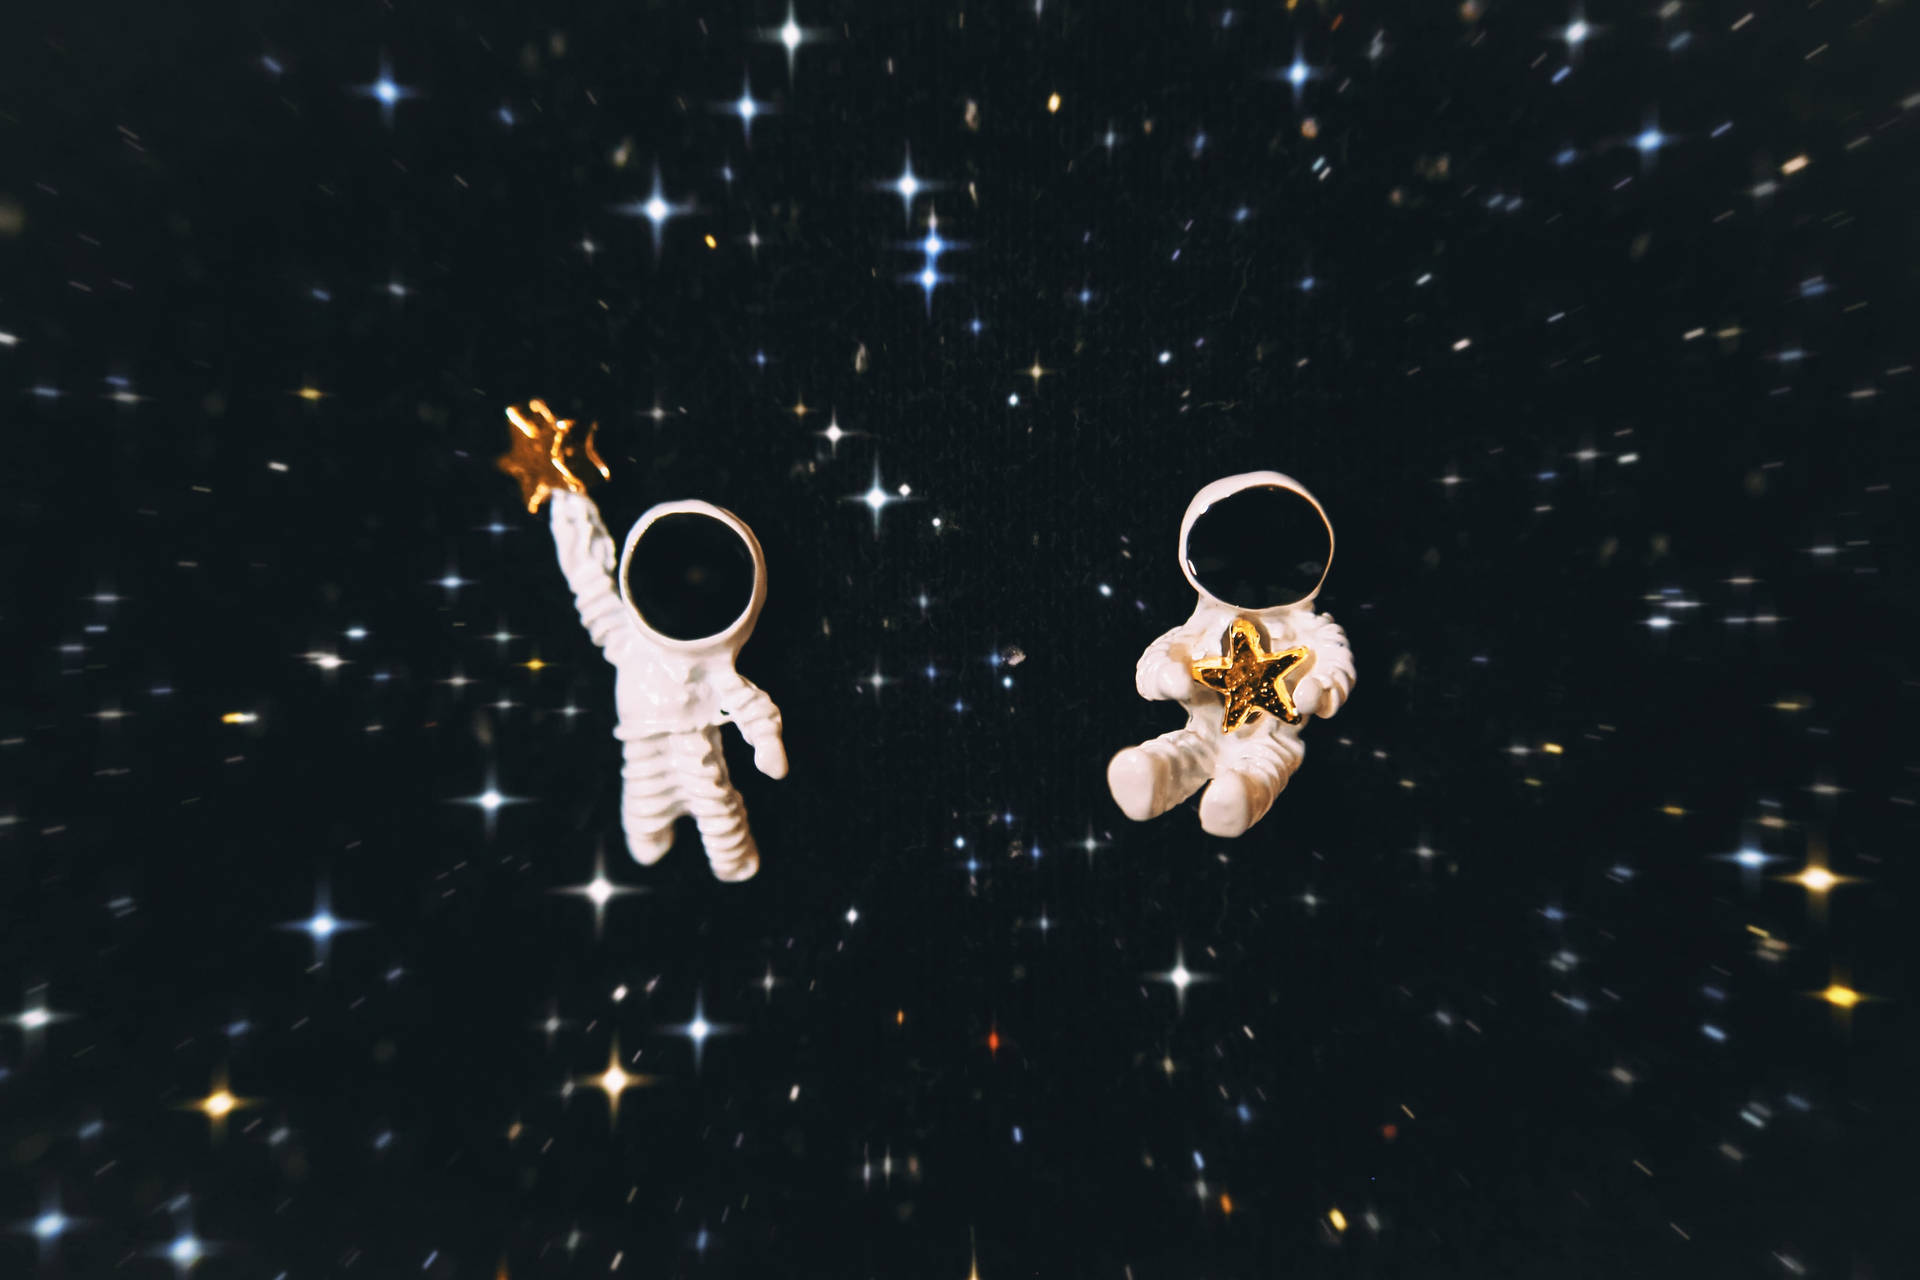 Top 999+ 4k Astronaut Wallpapers Full HD, 4K✅Free to Use